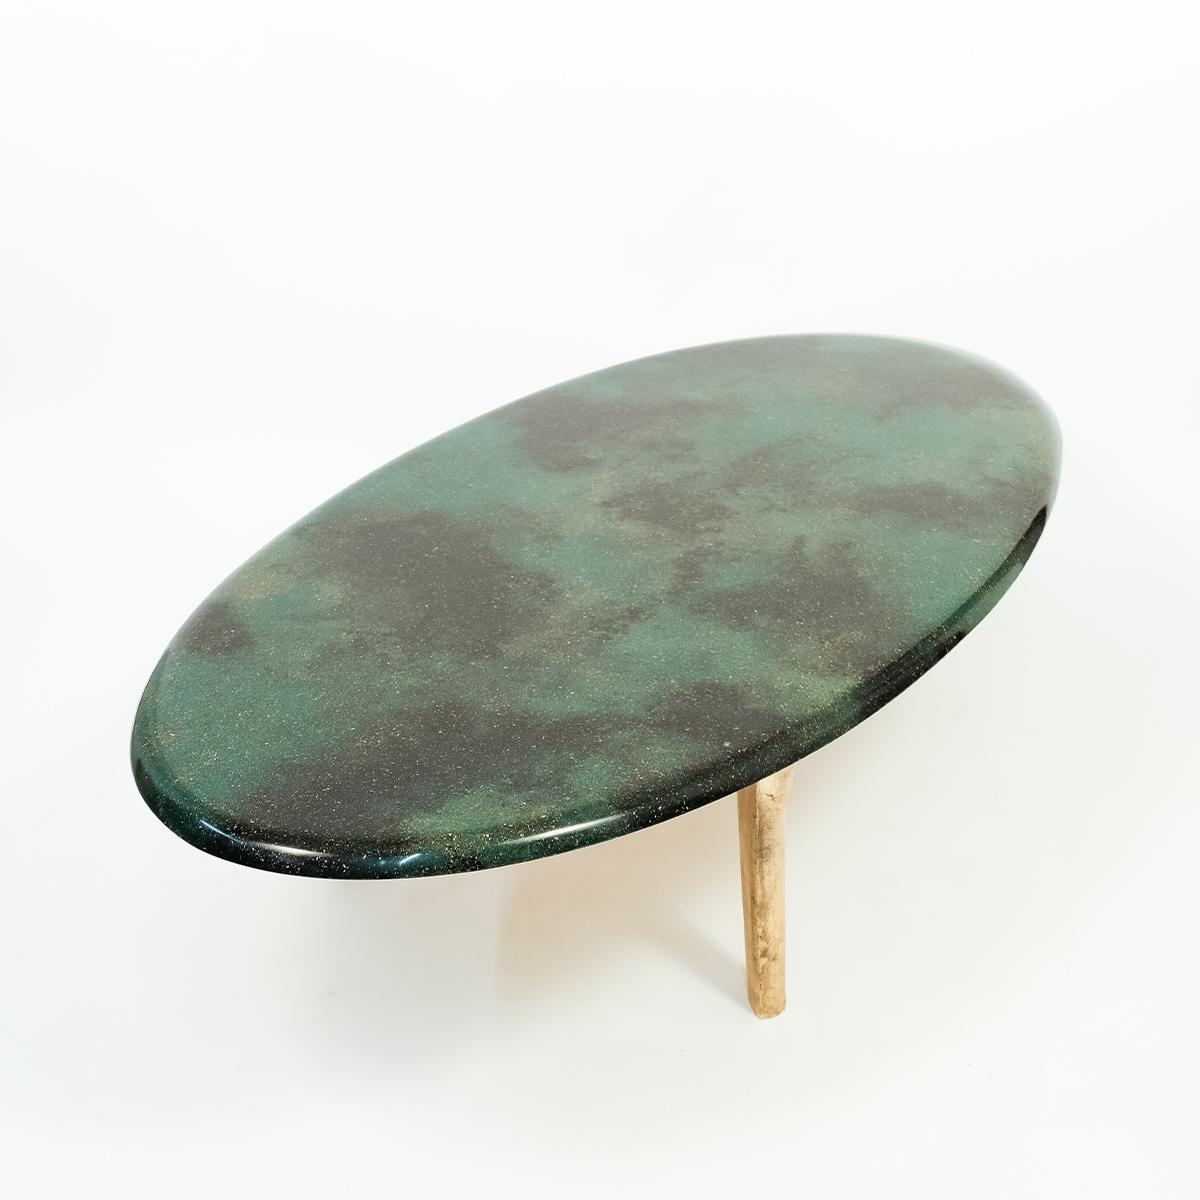 Modern 21st Century Collectible Design, A Noste Bronze Leaf and Sawdust Resin Low Table